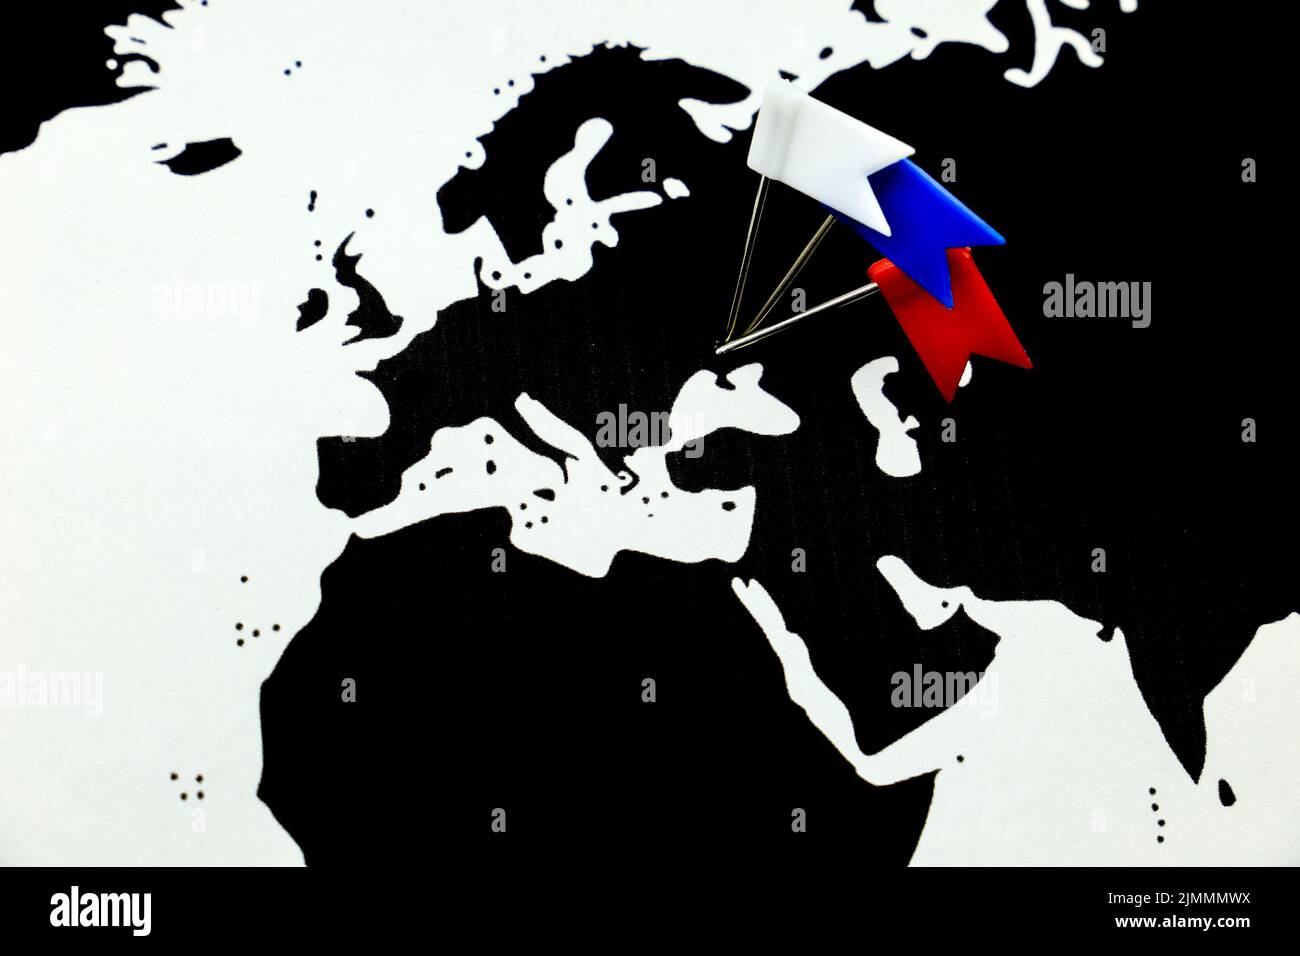 White, Blue and Red pointing flags on Ukraine country on black world map Stock Photo